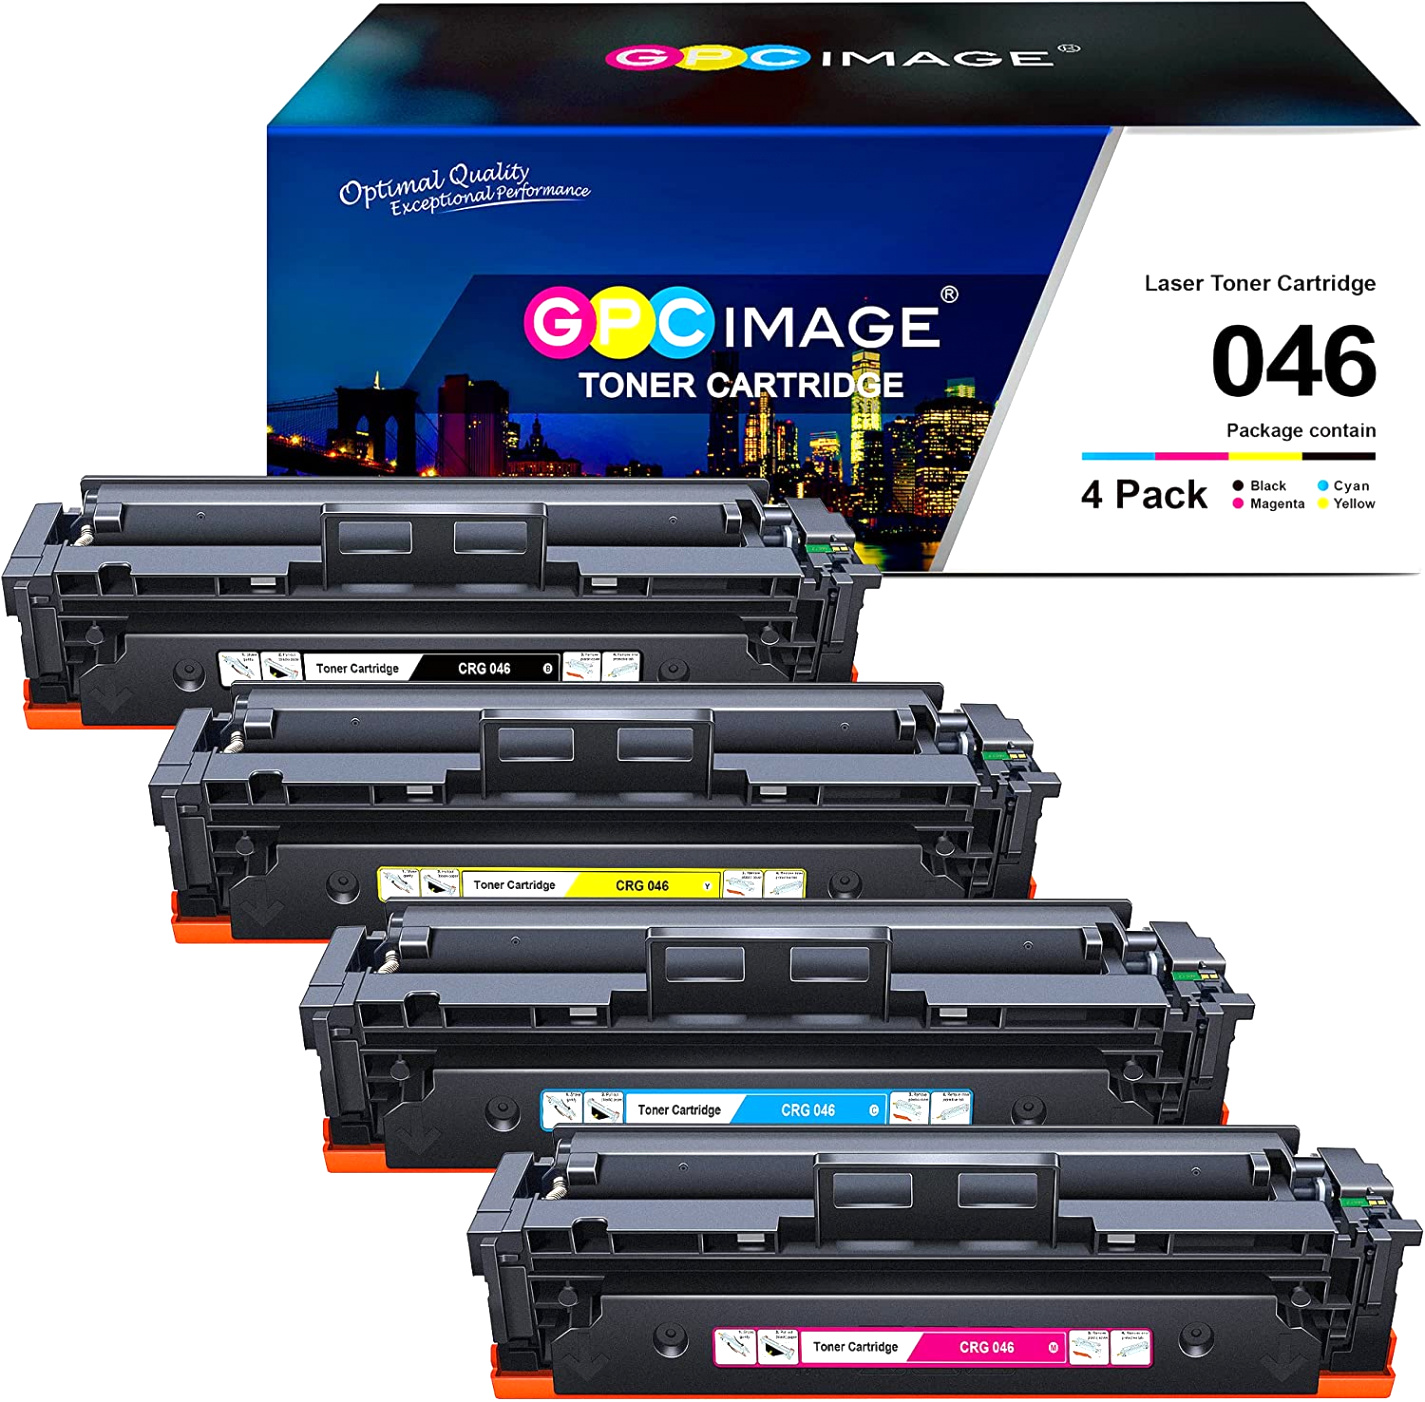 Car Rental software In Cannon Tn Dans Amazon.com: Gpc Image Compatible toner Cartridge Replacement for ...